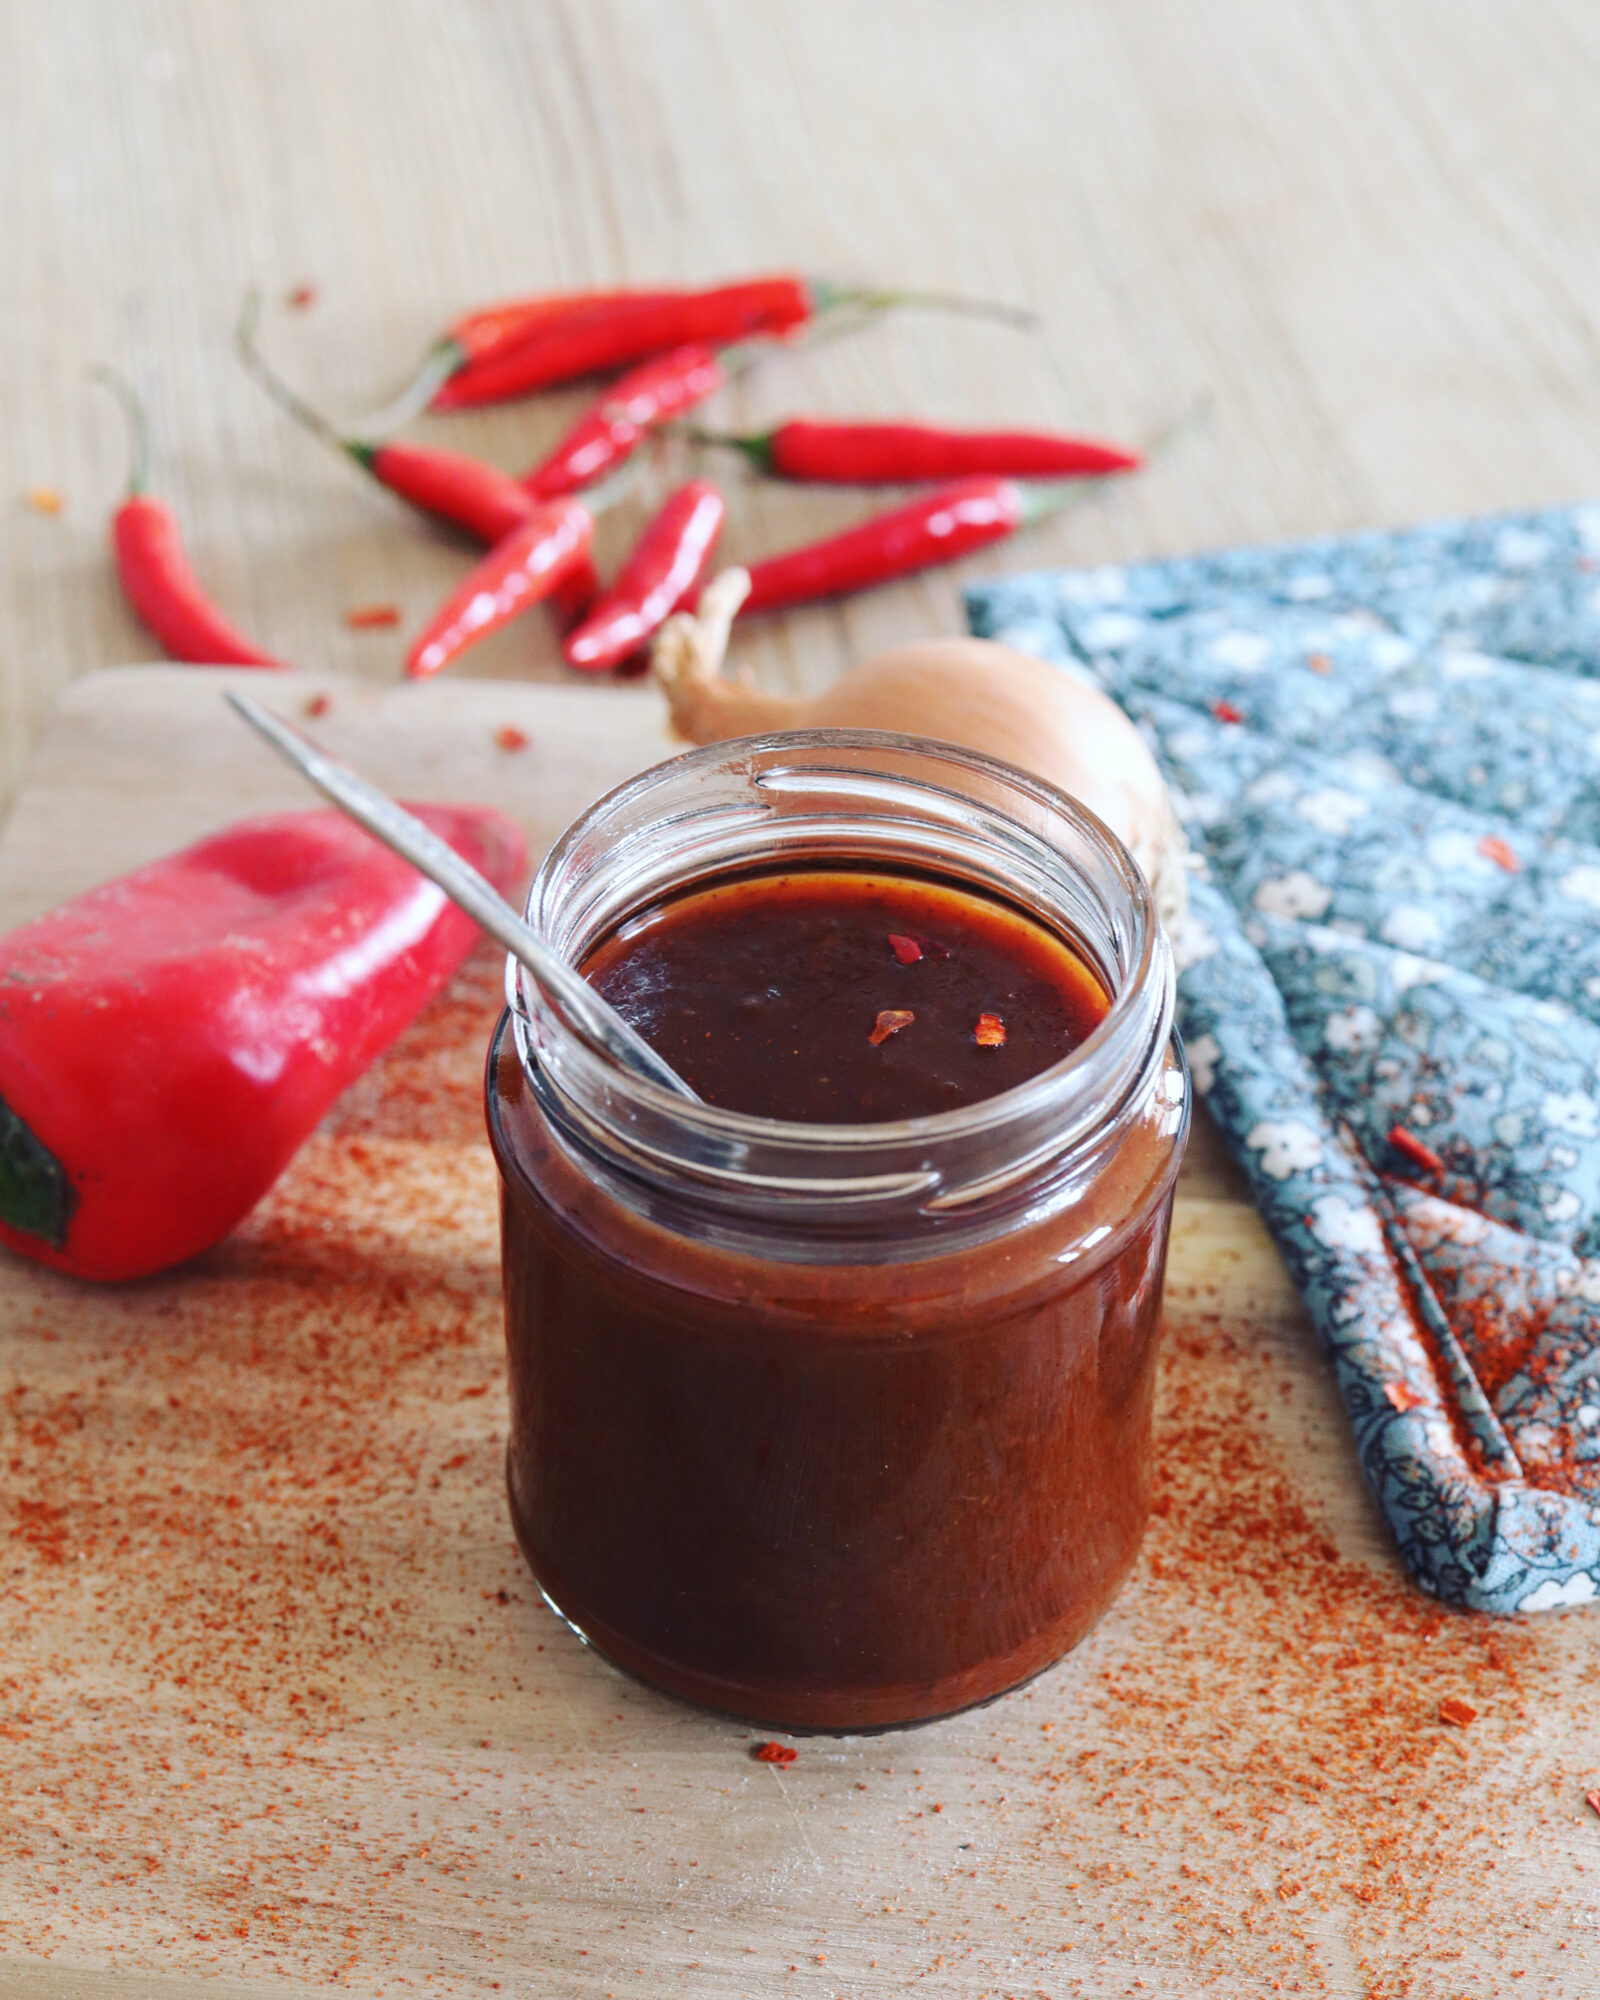 Barbecue sauce in a jar, red peppers in the background